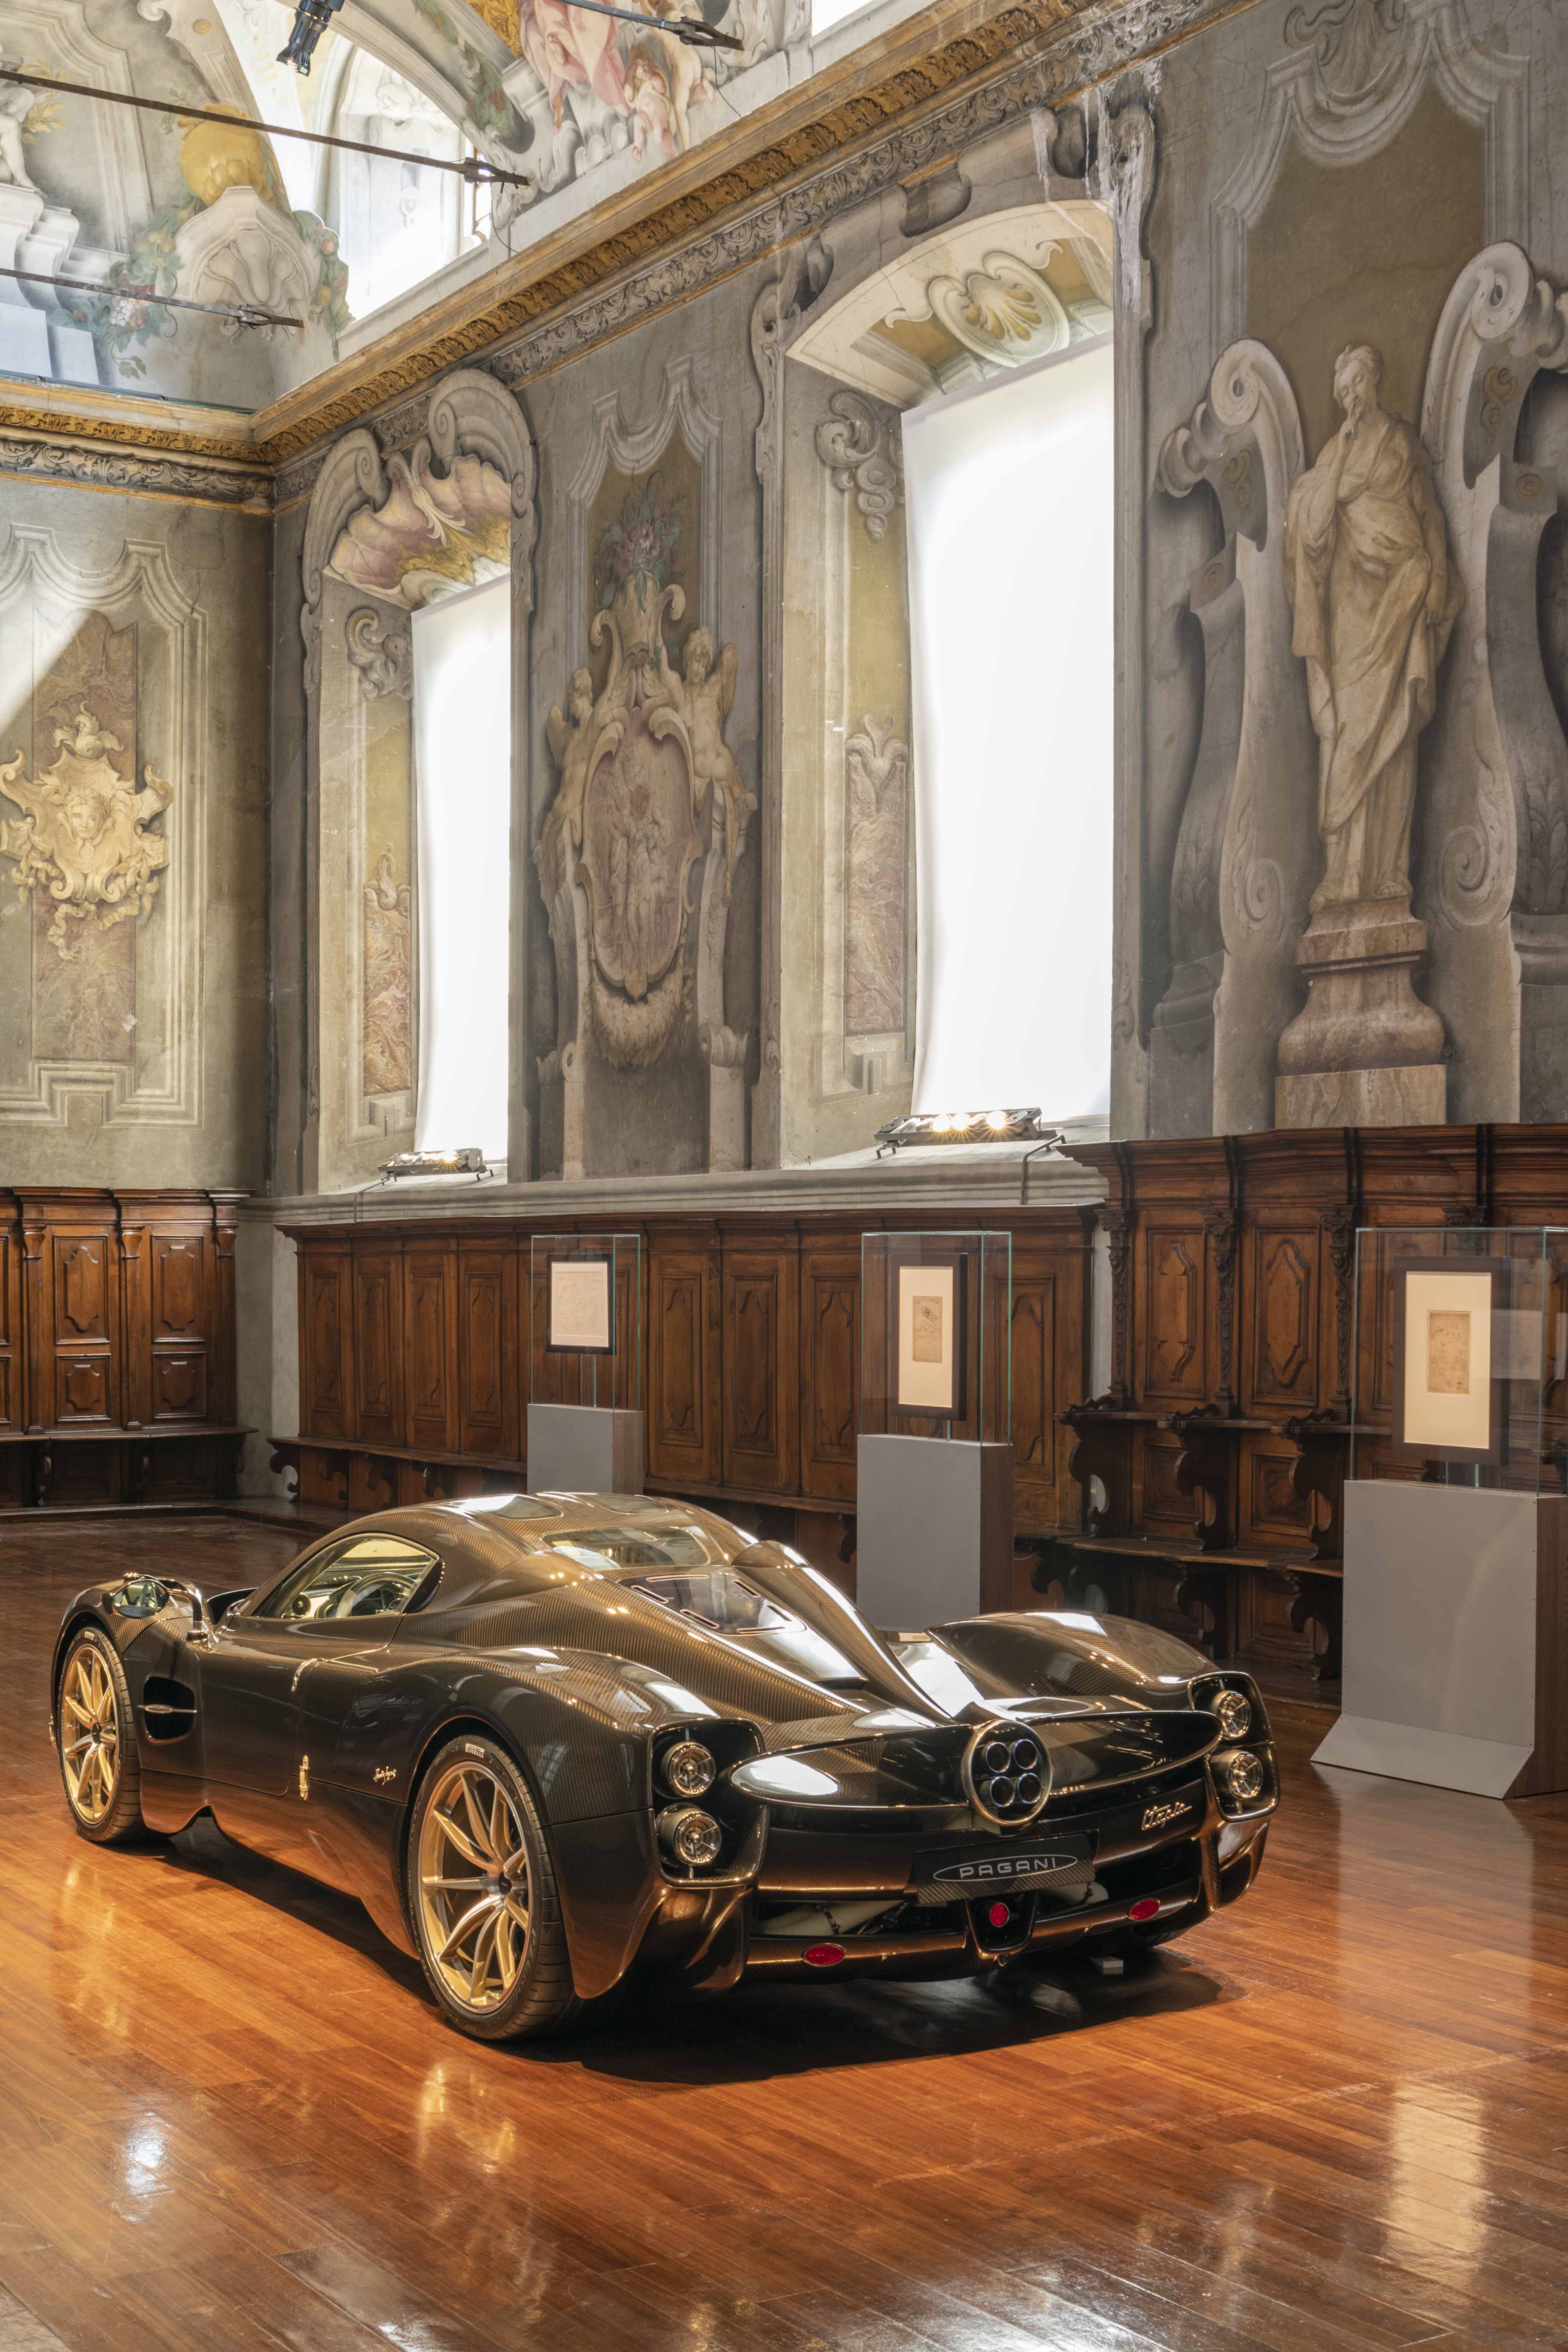 Pagani Utopia unveiled at the National Science & Technology Museum in Milan surrounded by original drawings by Leonardo da Vinci